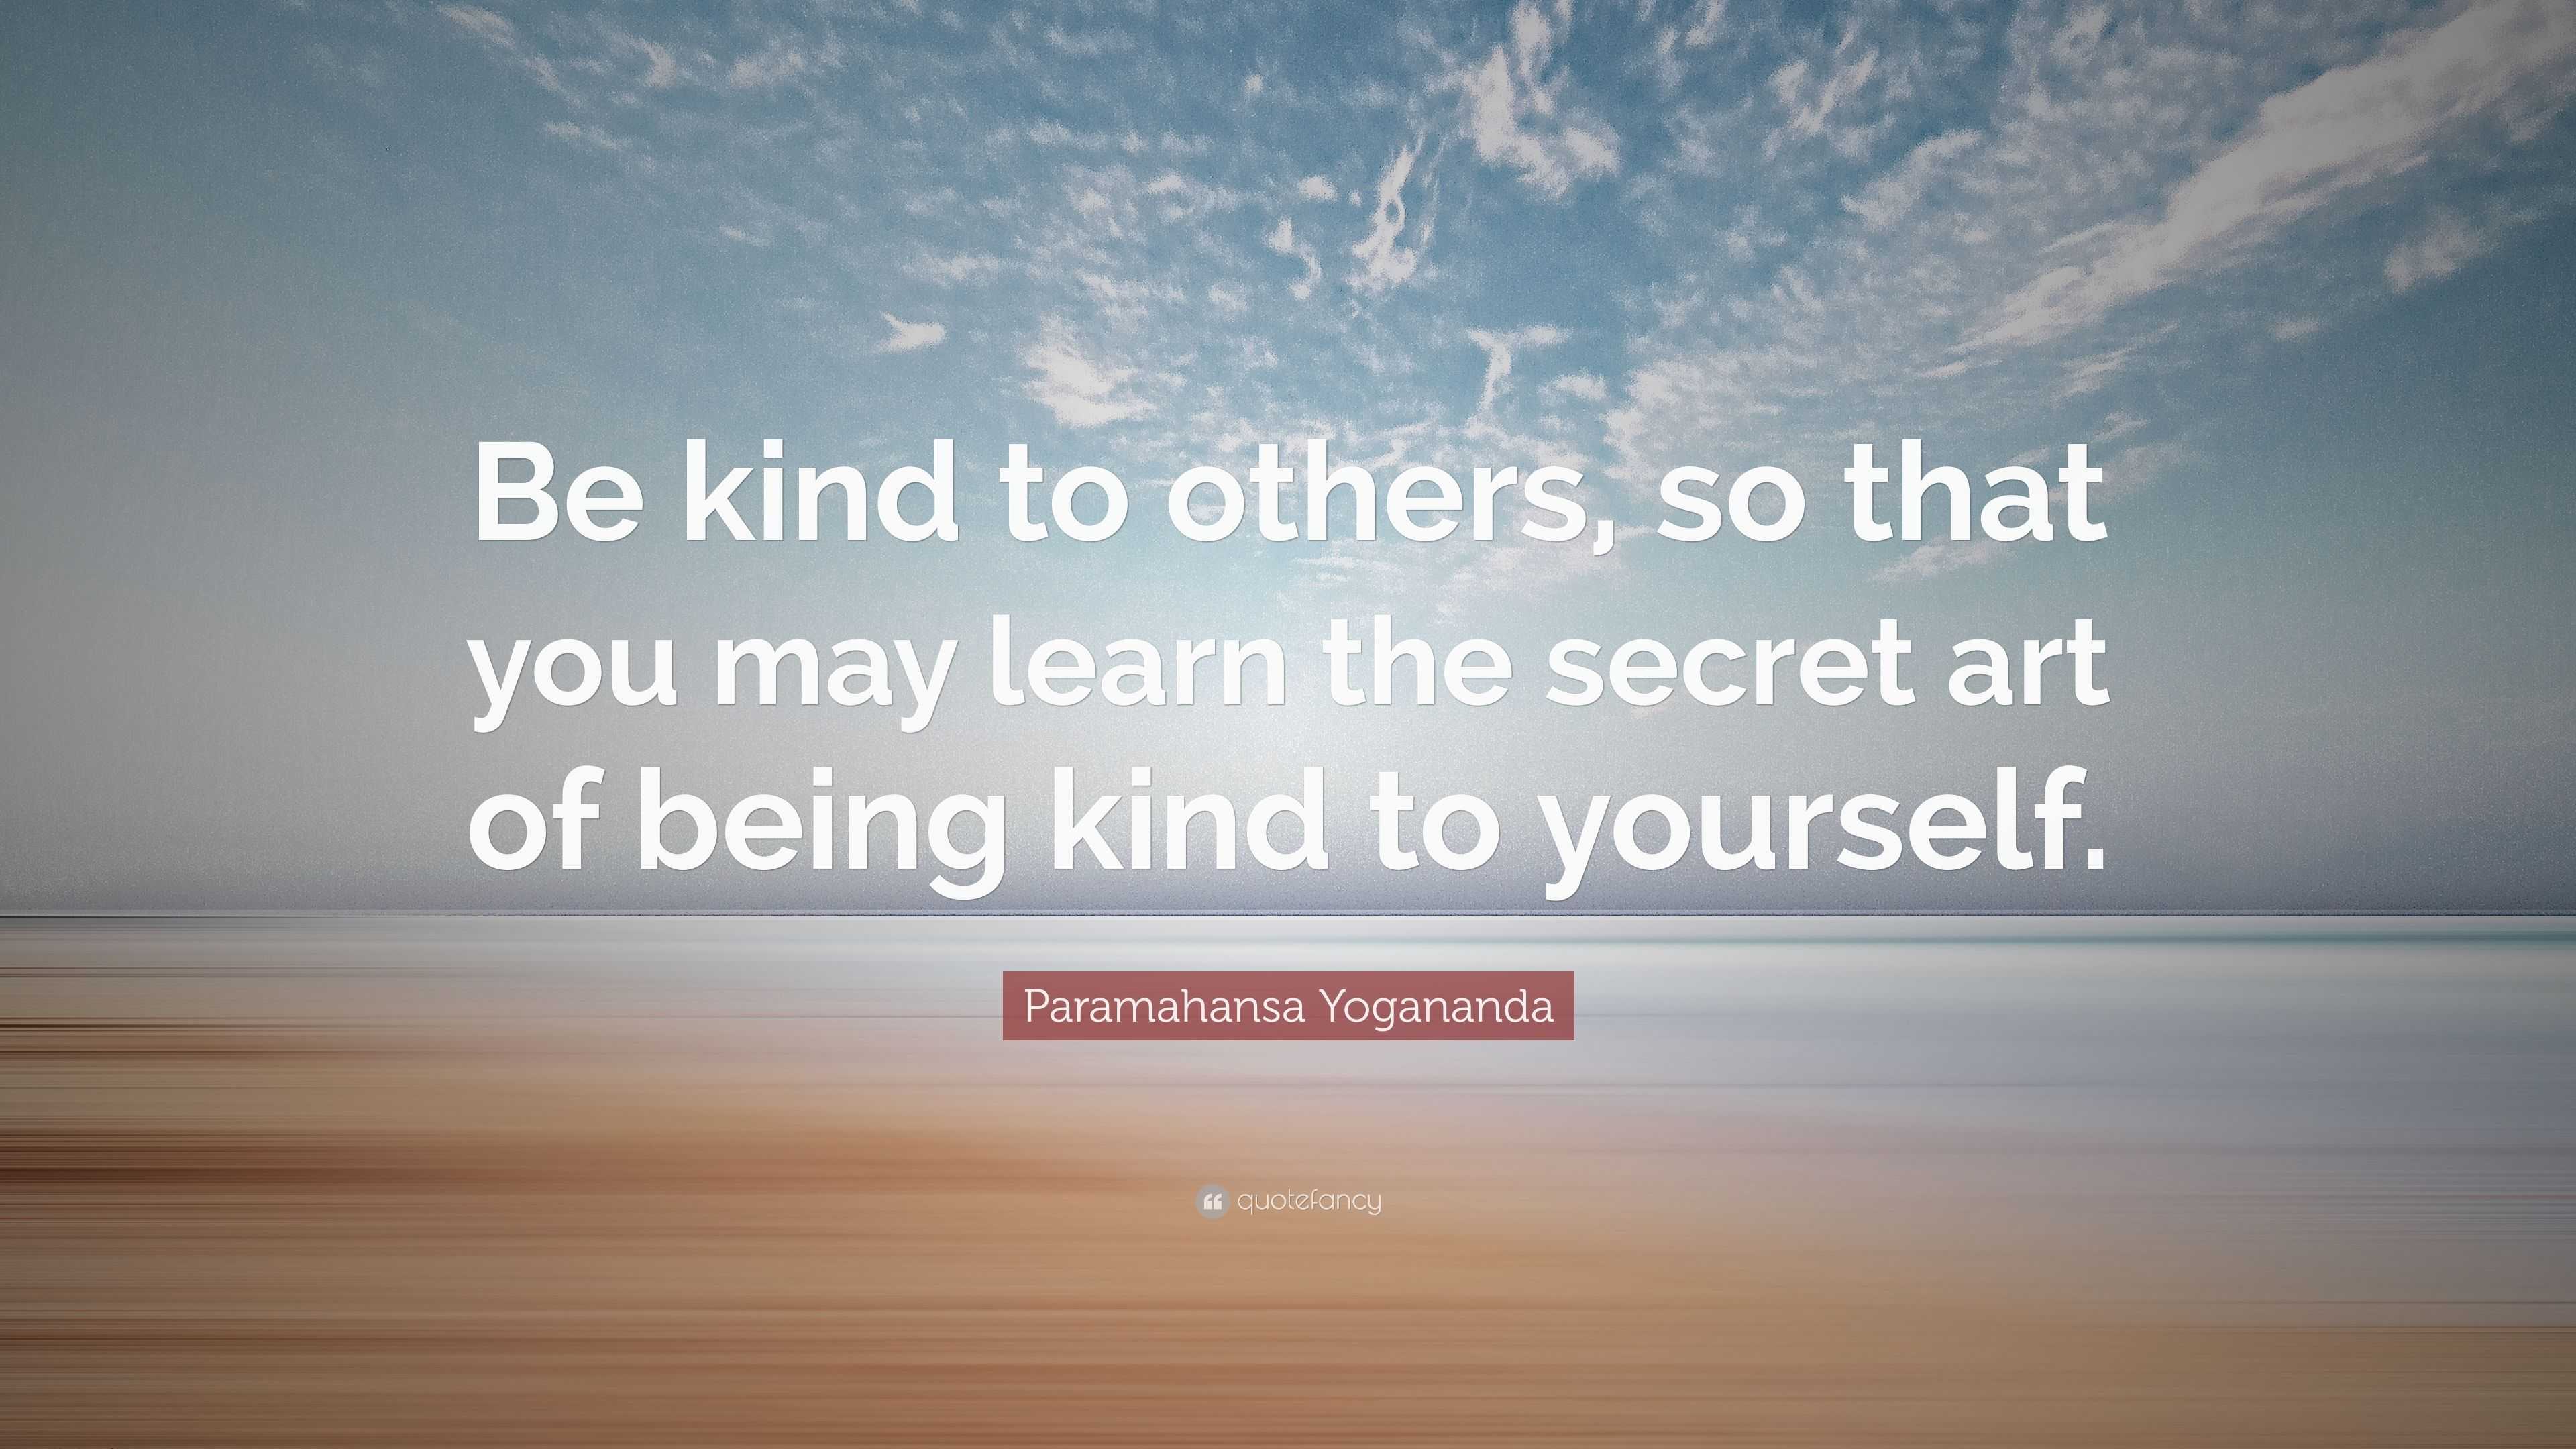 Paramahansa Yogananda Quote: “Be kind to others, so that you may learn ...